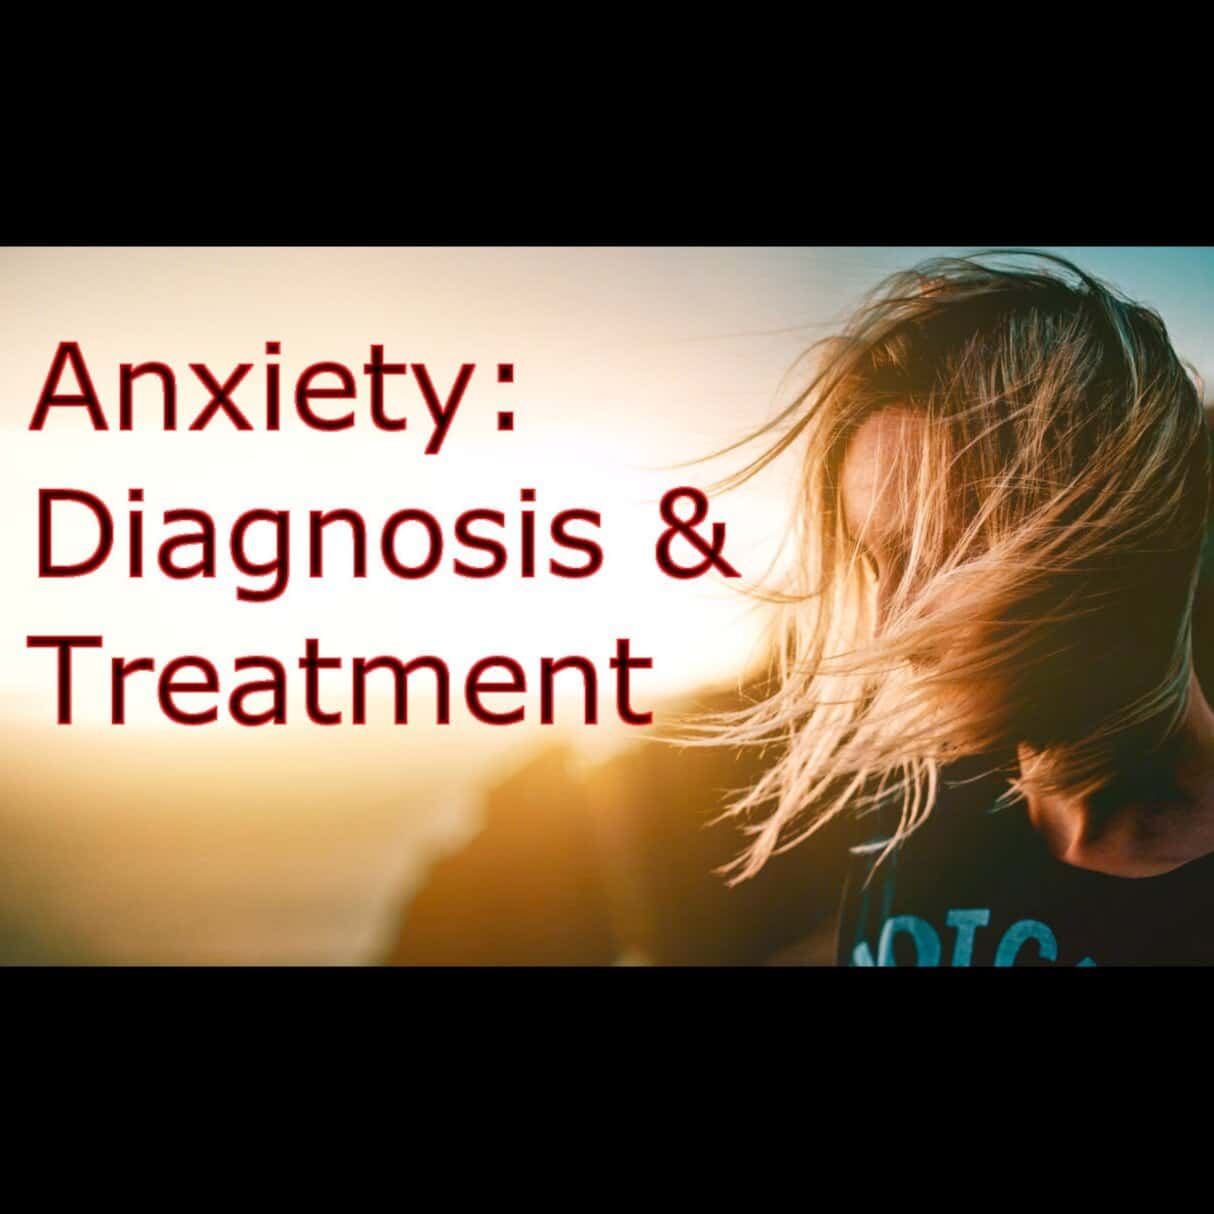 Anxiety: Diagnosis & Treatment poster